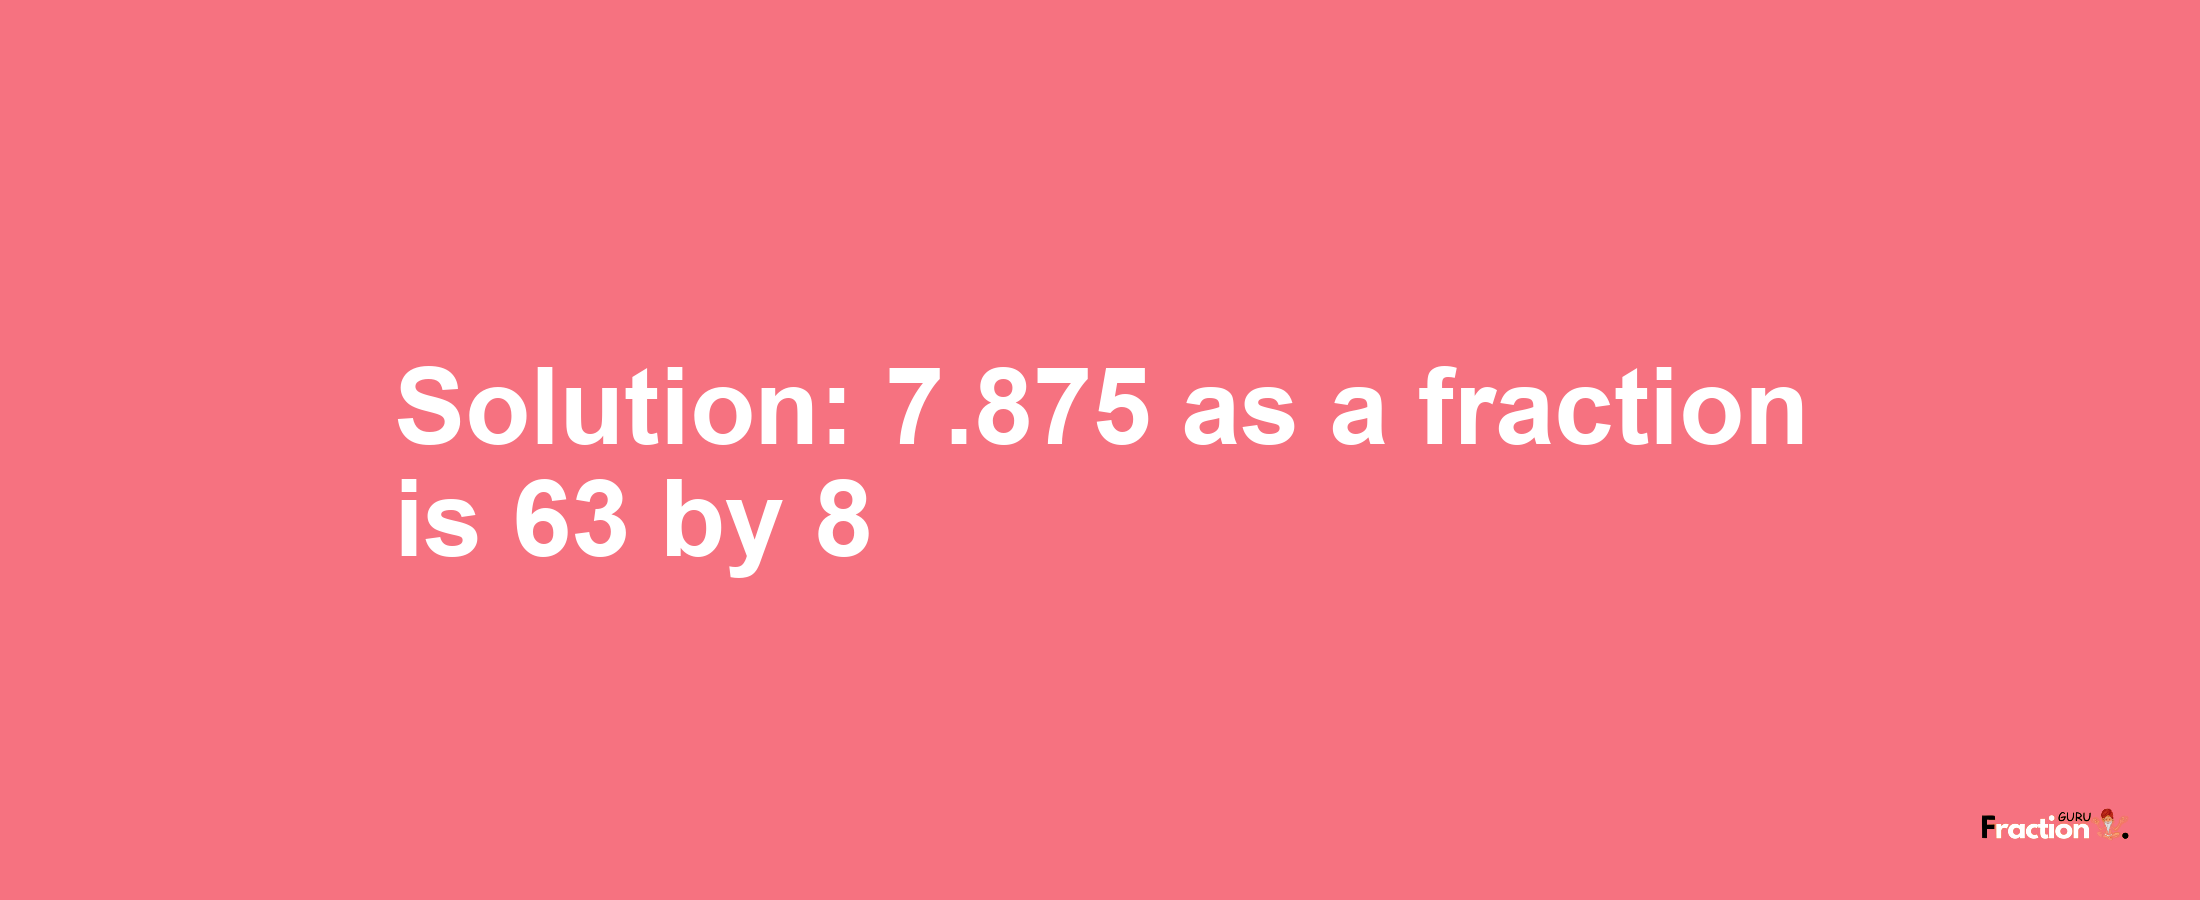 Solution:7.875 as a fraction is 63/8